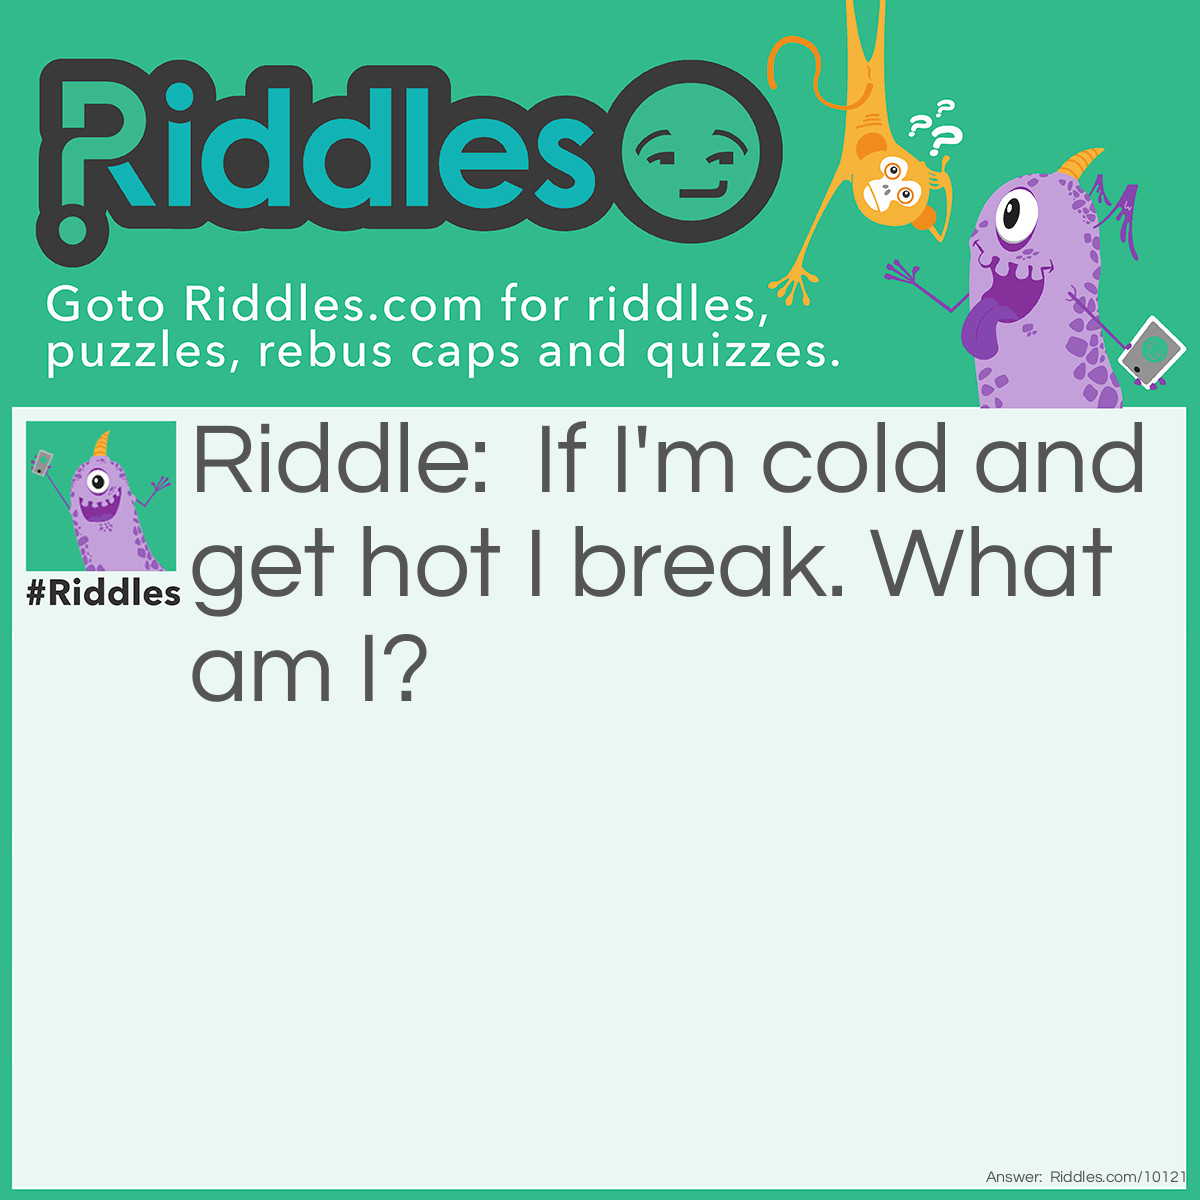 Riddle: If I'm cold and get hot I break. What am I? Answer: A china plate.